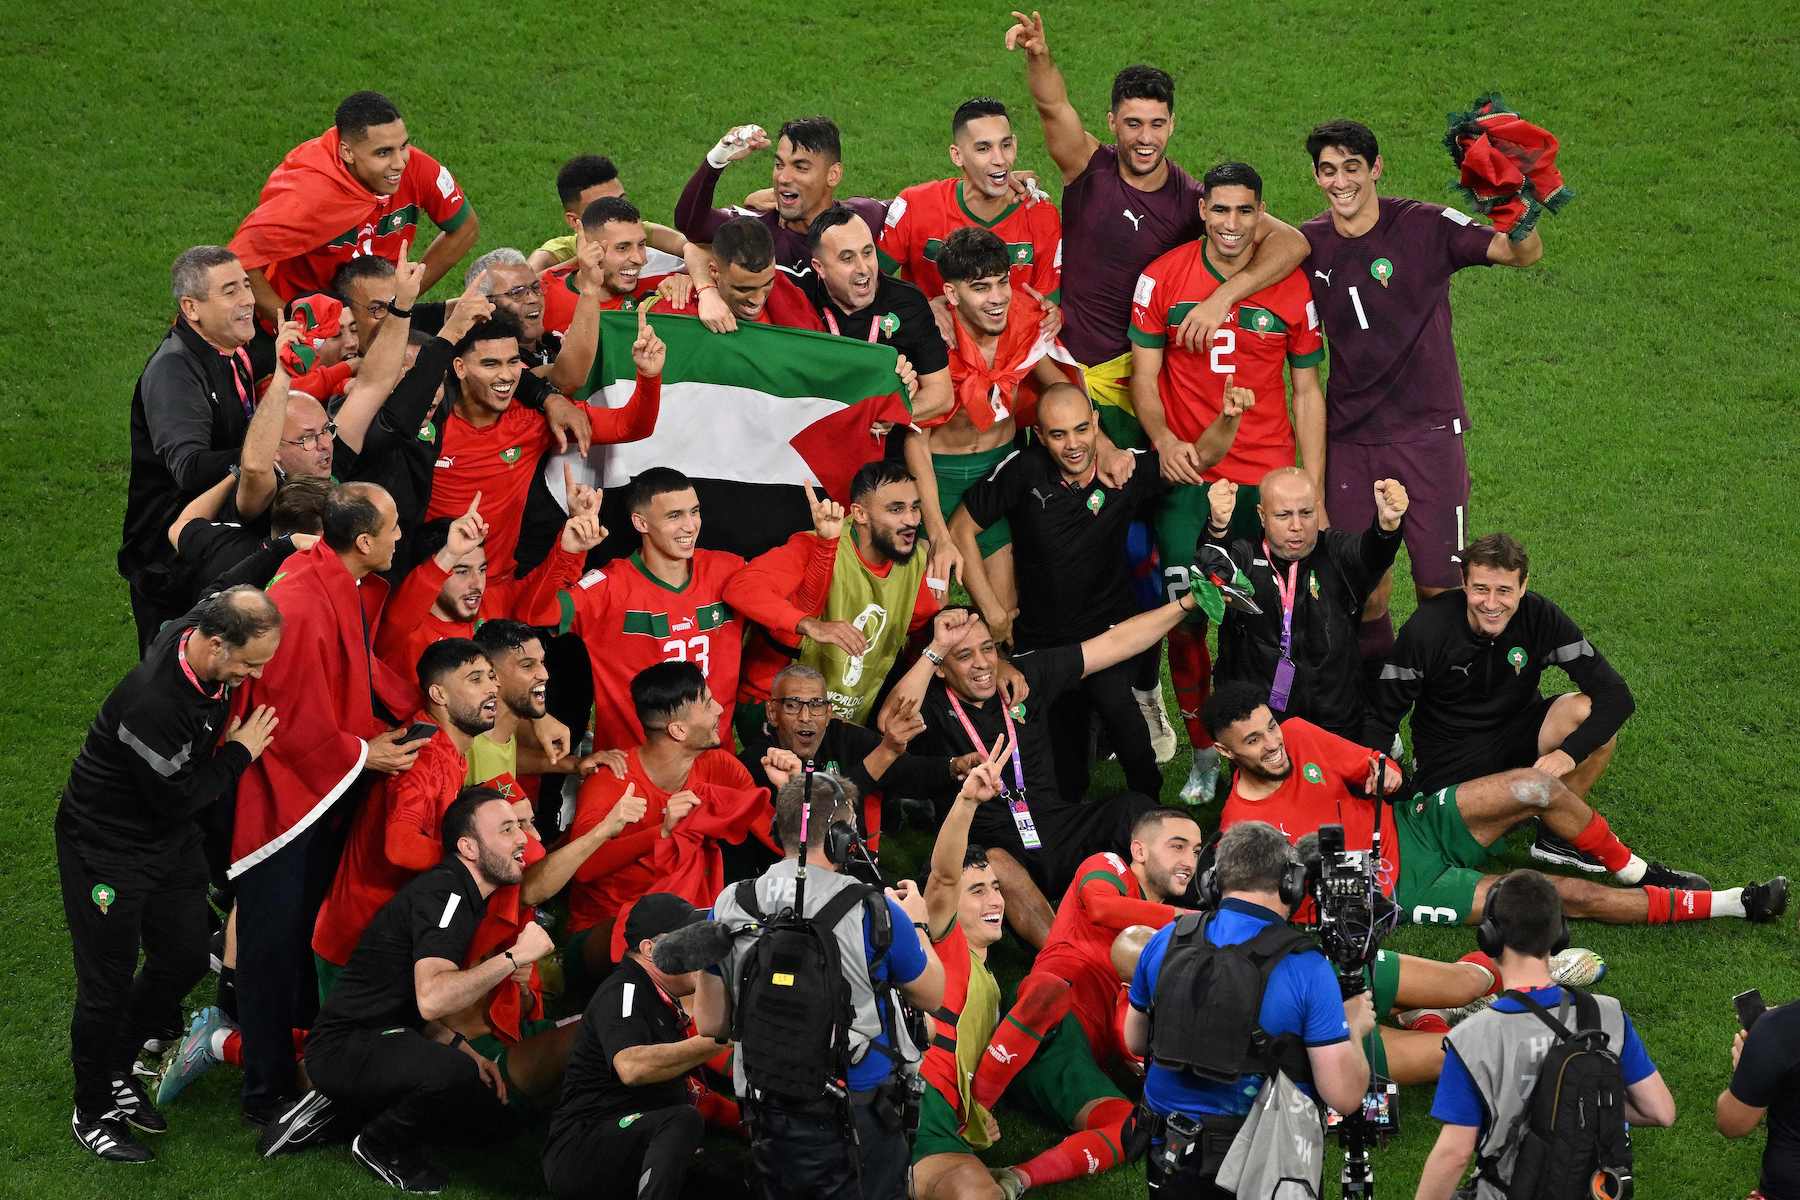 Morocco’s Soccer Team And Fans Celebrate Their Historic Win Against Spain By Waving Palestine’s Flag